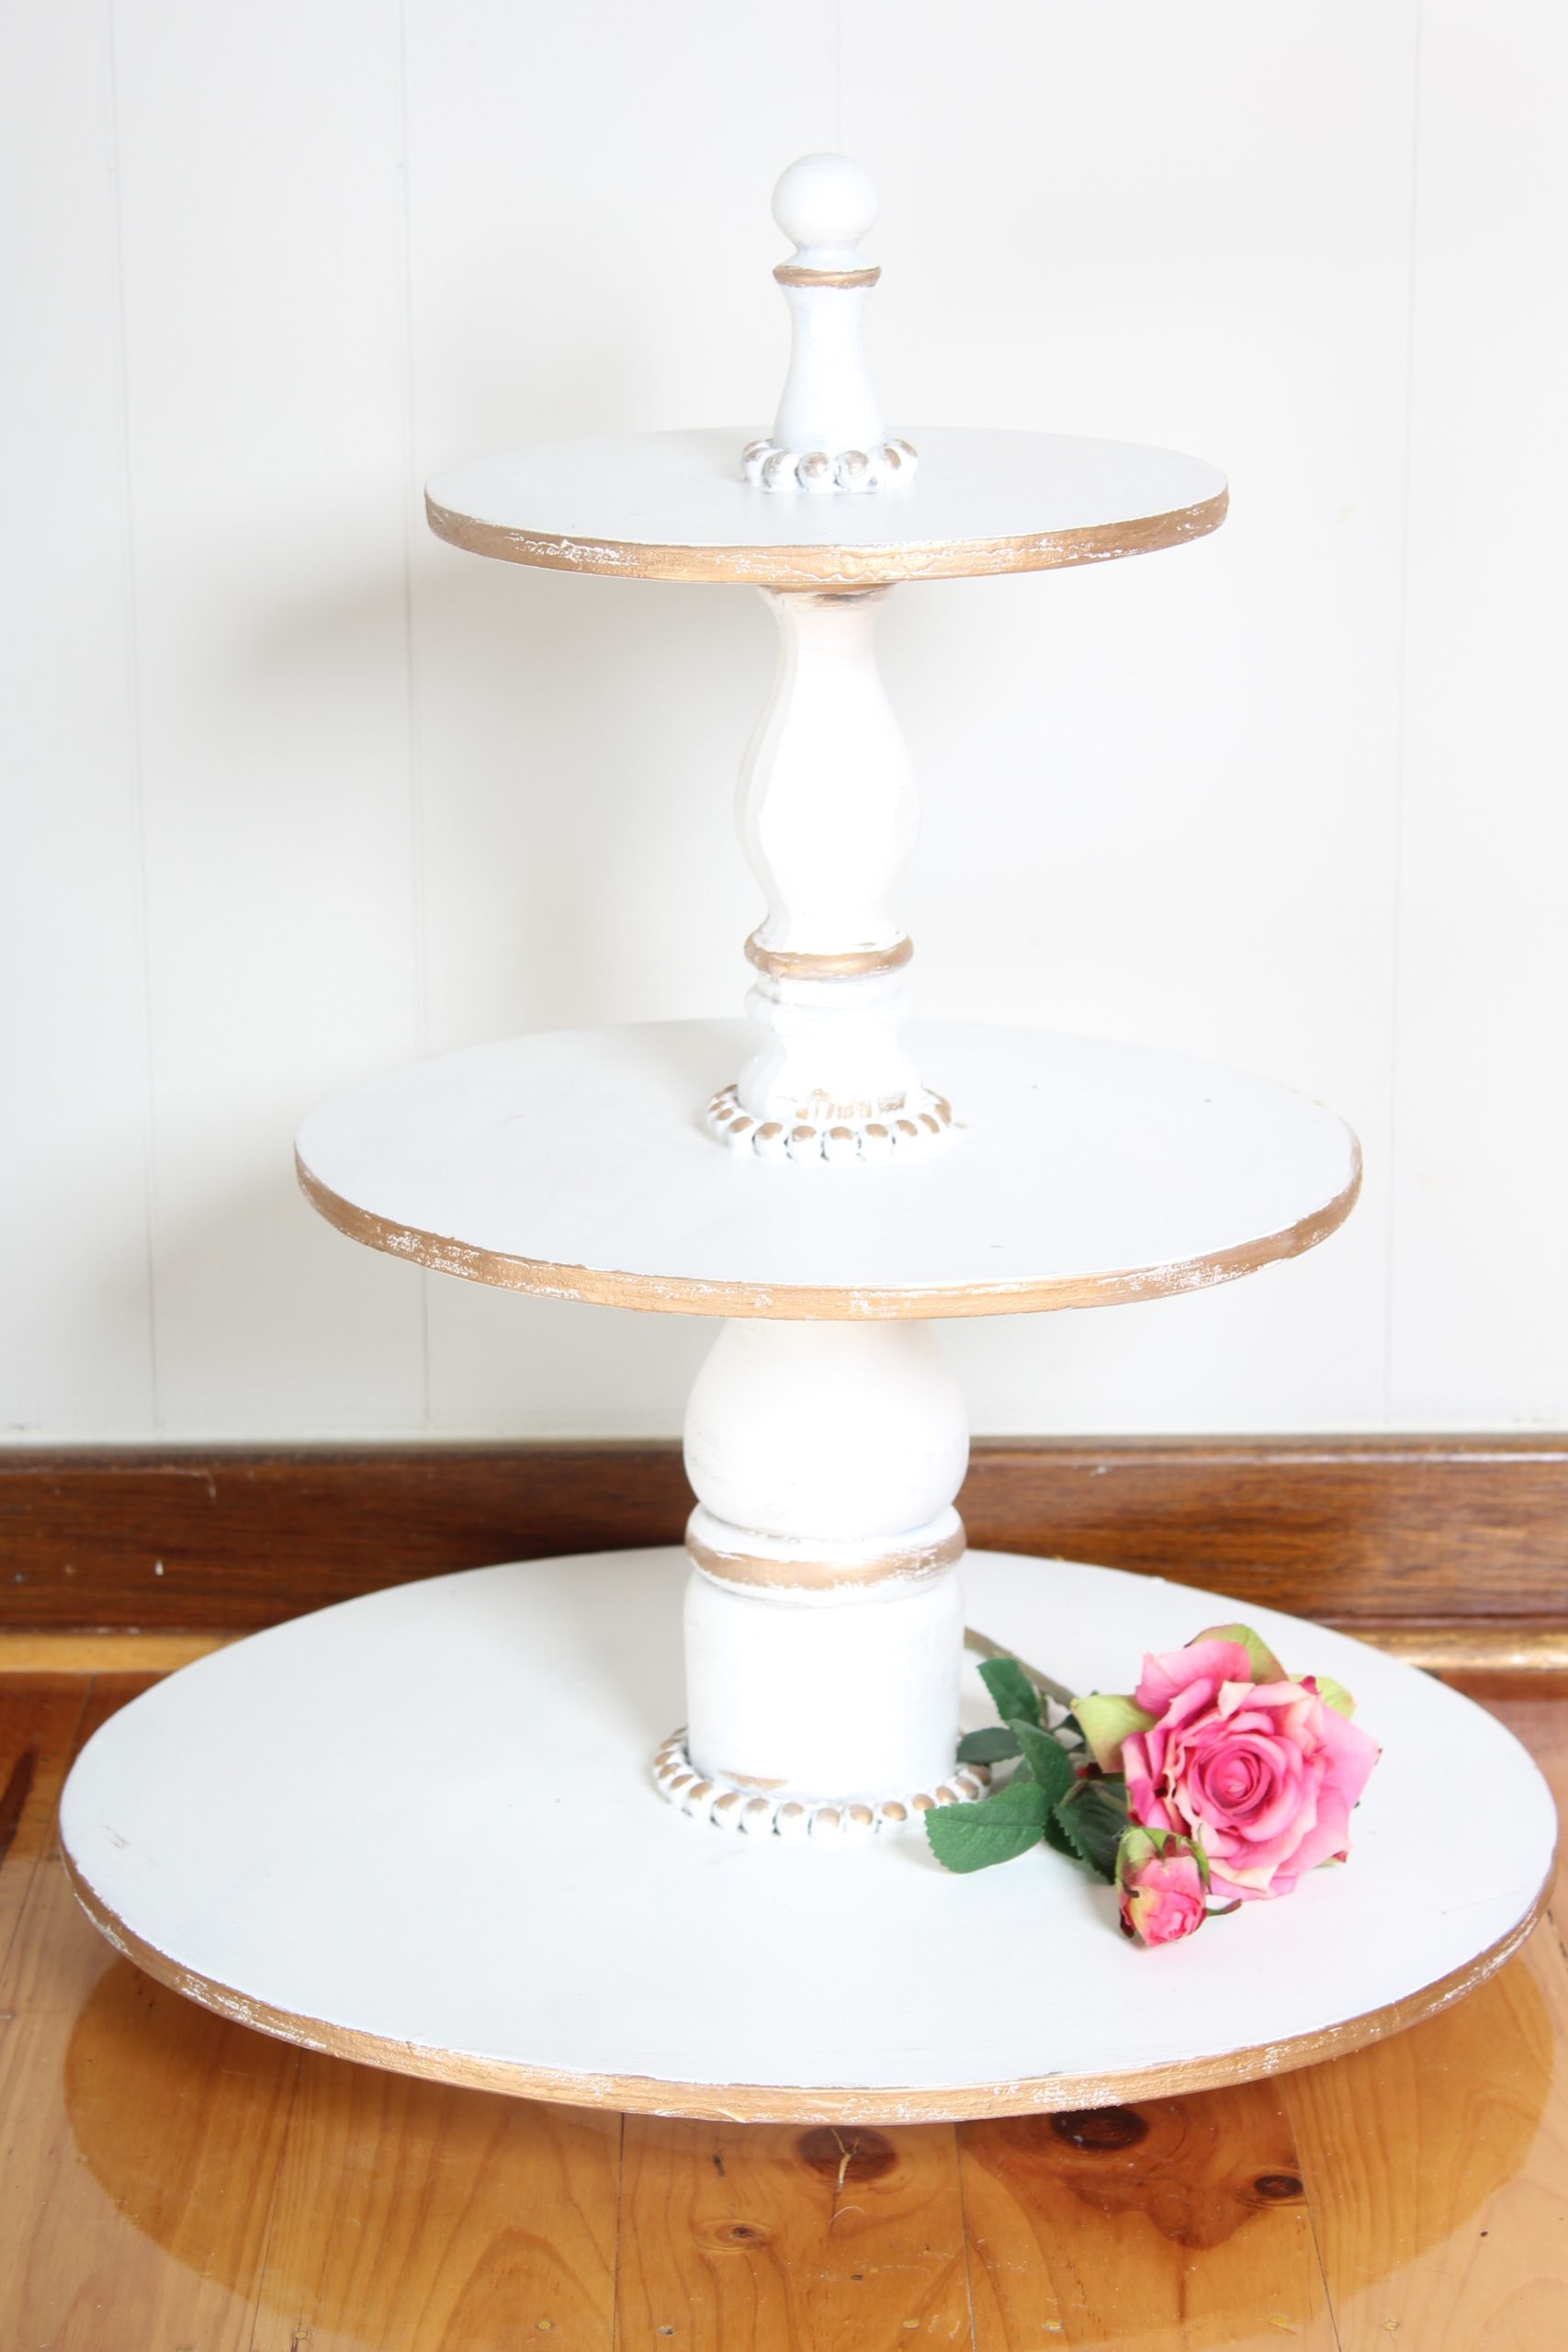 Large Rustic Timber Cake Stand Vintage & Antique